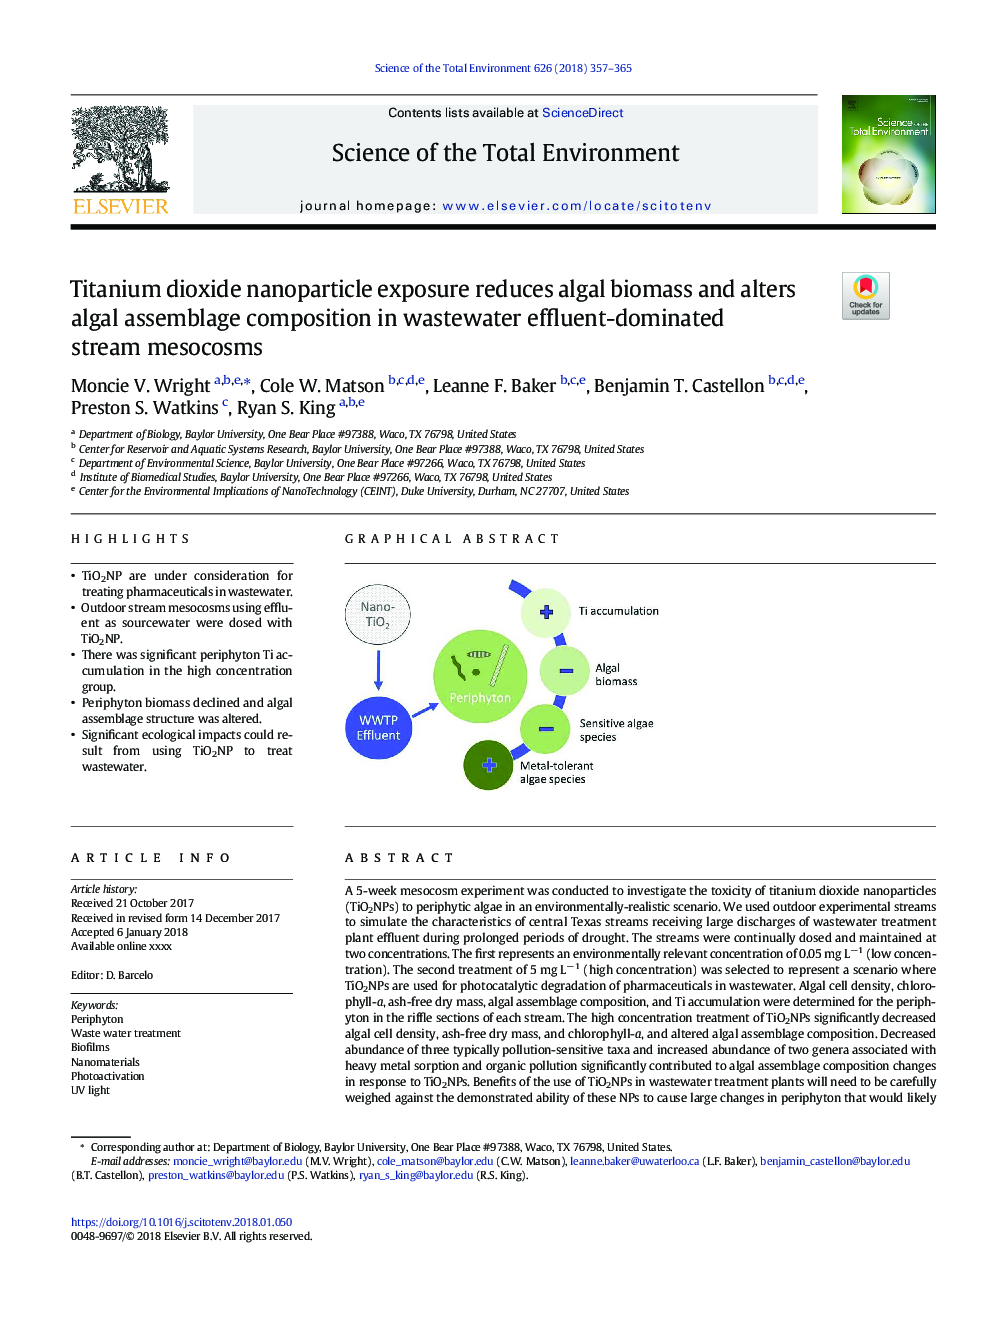 Titanium dioxide nanoparticle exposure reduces algal biomass and alters algal assemblage composition in wastewater effluent-dominated stream mesocosms